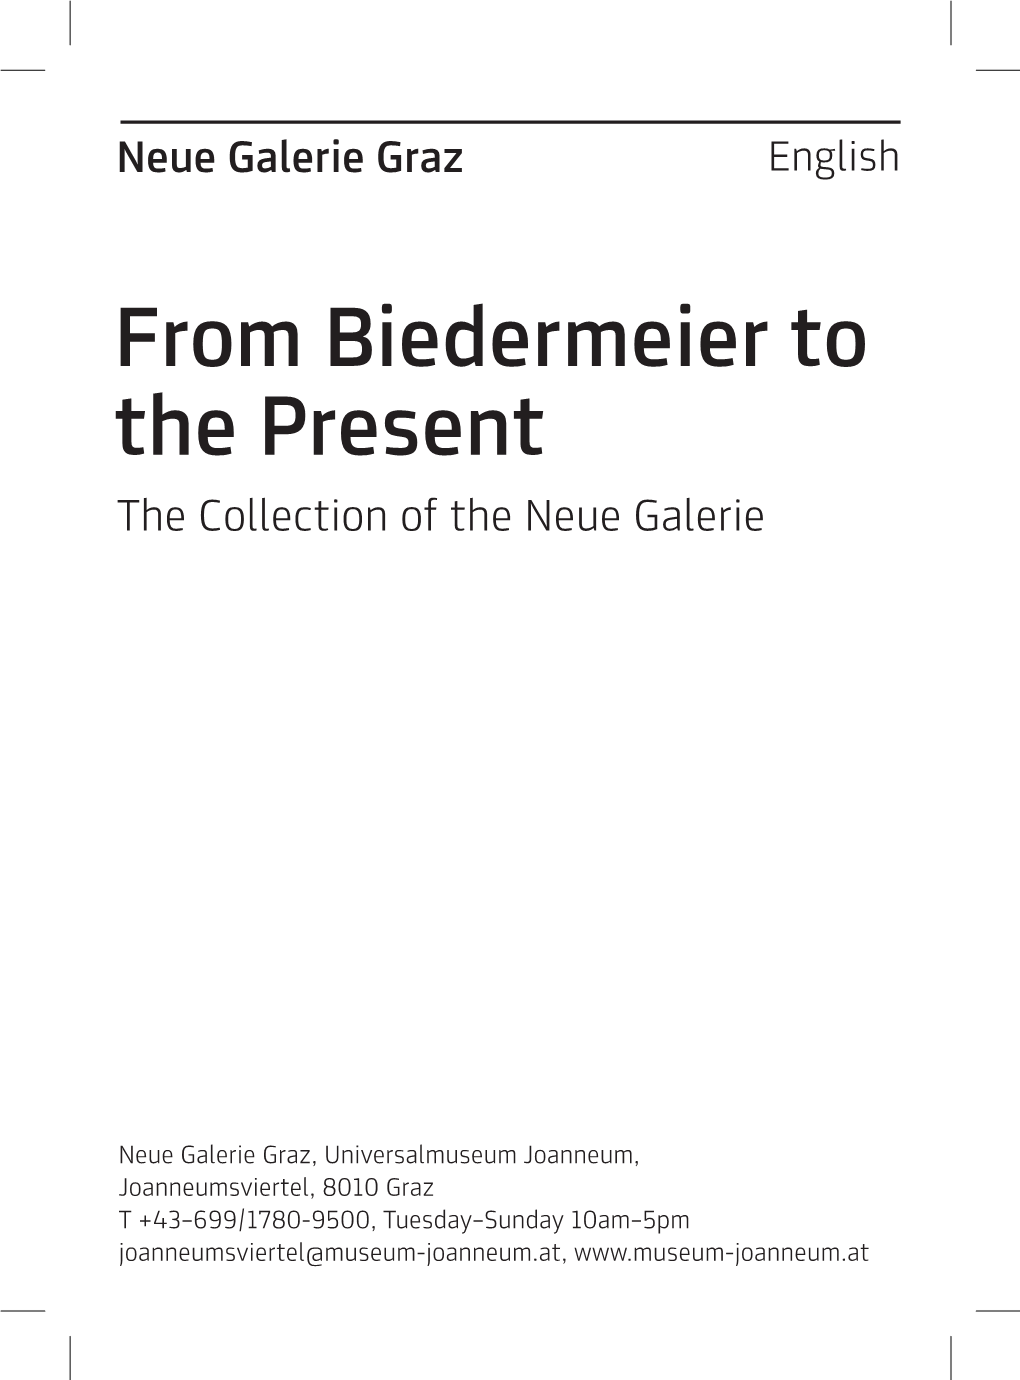 From Biedermeier to the Present the Collection of the Neue Galerie